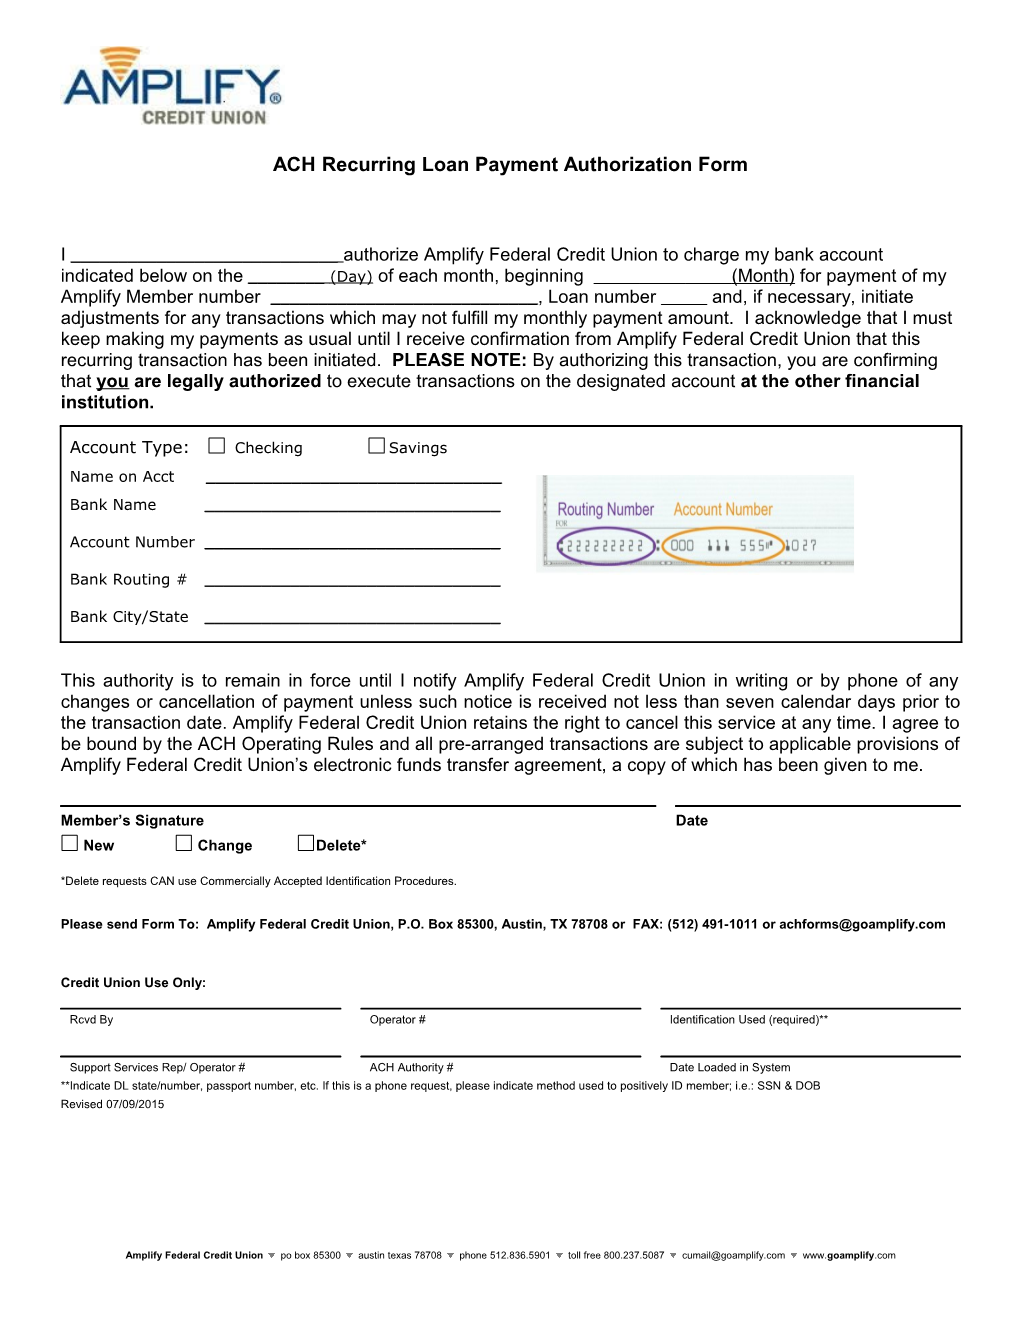 ACH Recurring Loan Payment Authorization